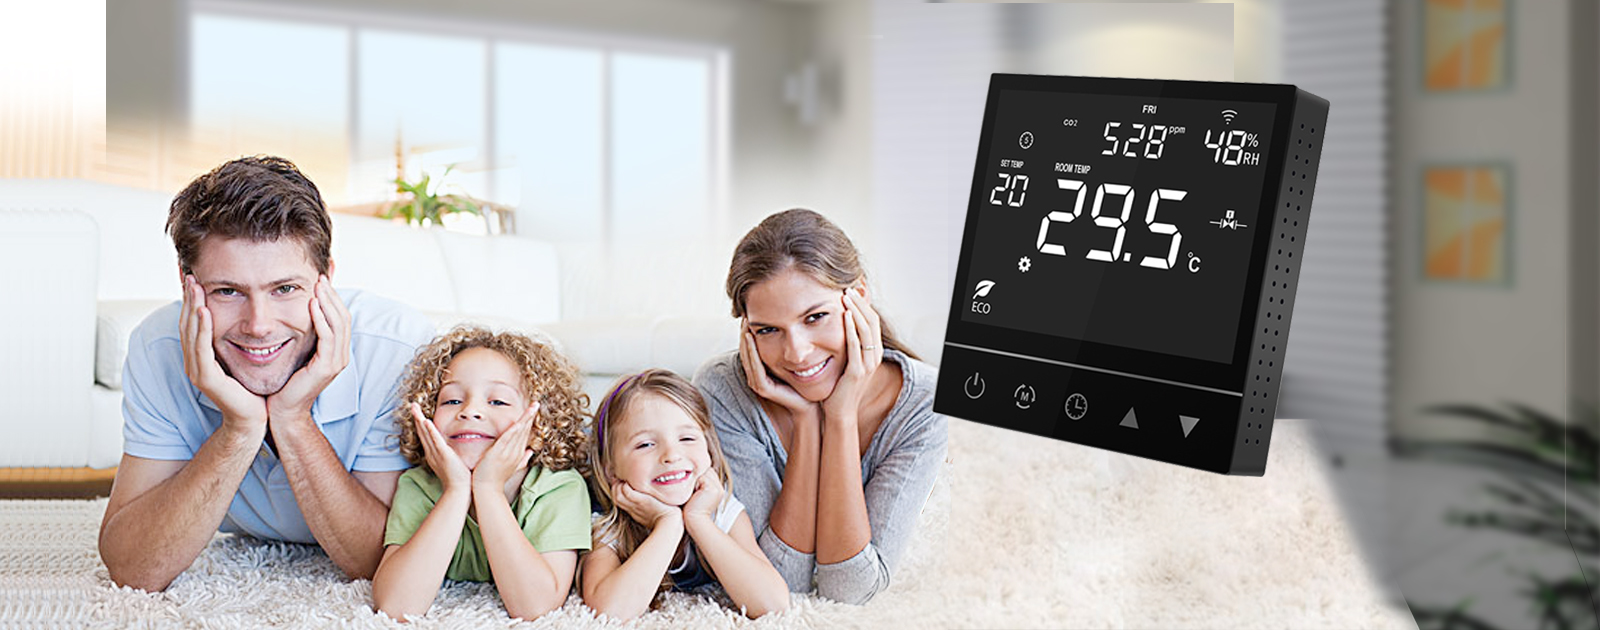 Smart heating thermostat